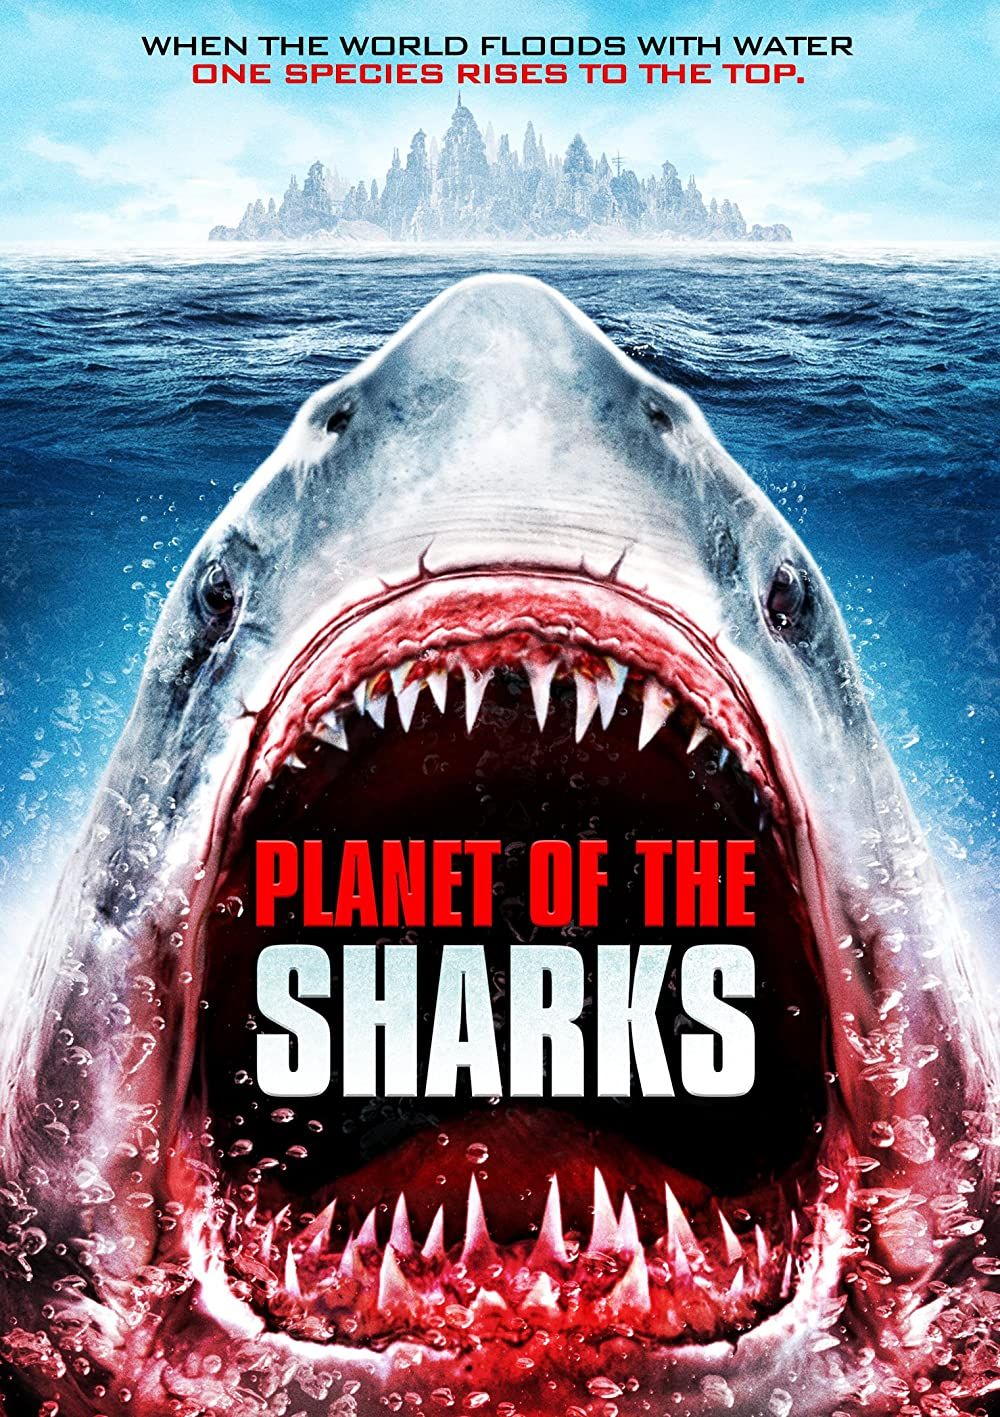 Planet of the Sharks (2016) Hindi Dubbed BluRay download full movie